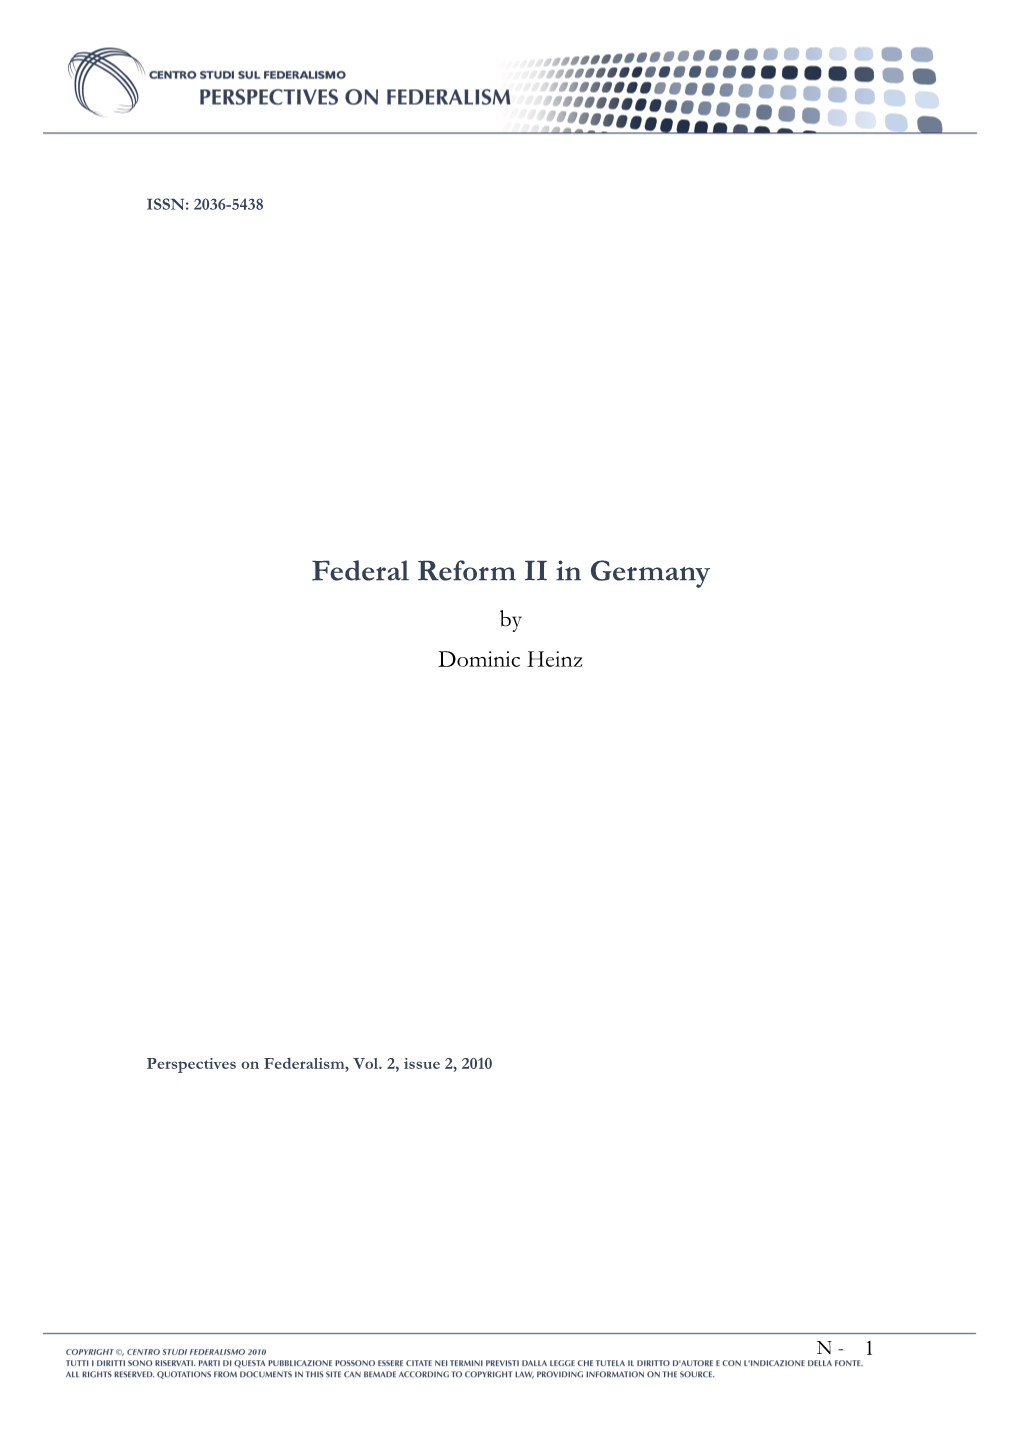 Federal Reform II in Germany by Dominic Heinz